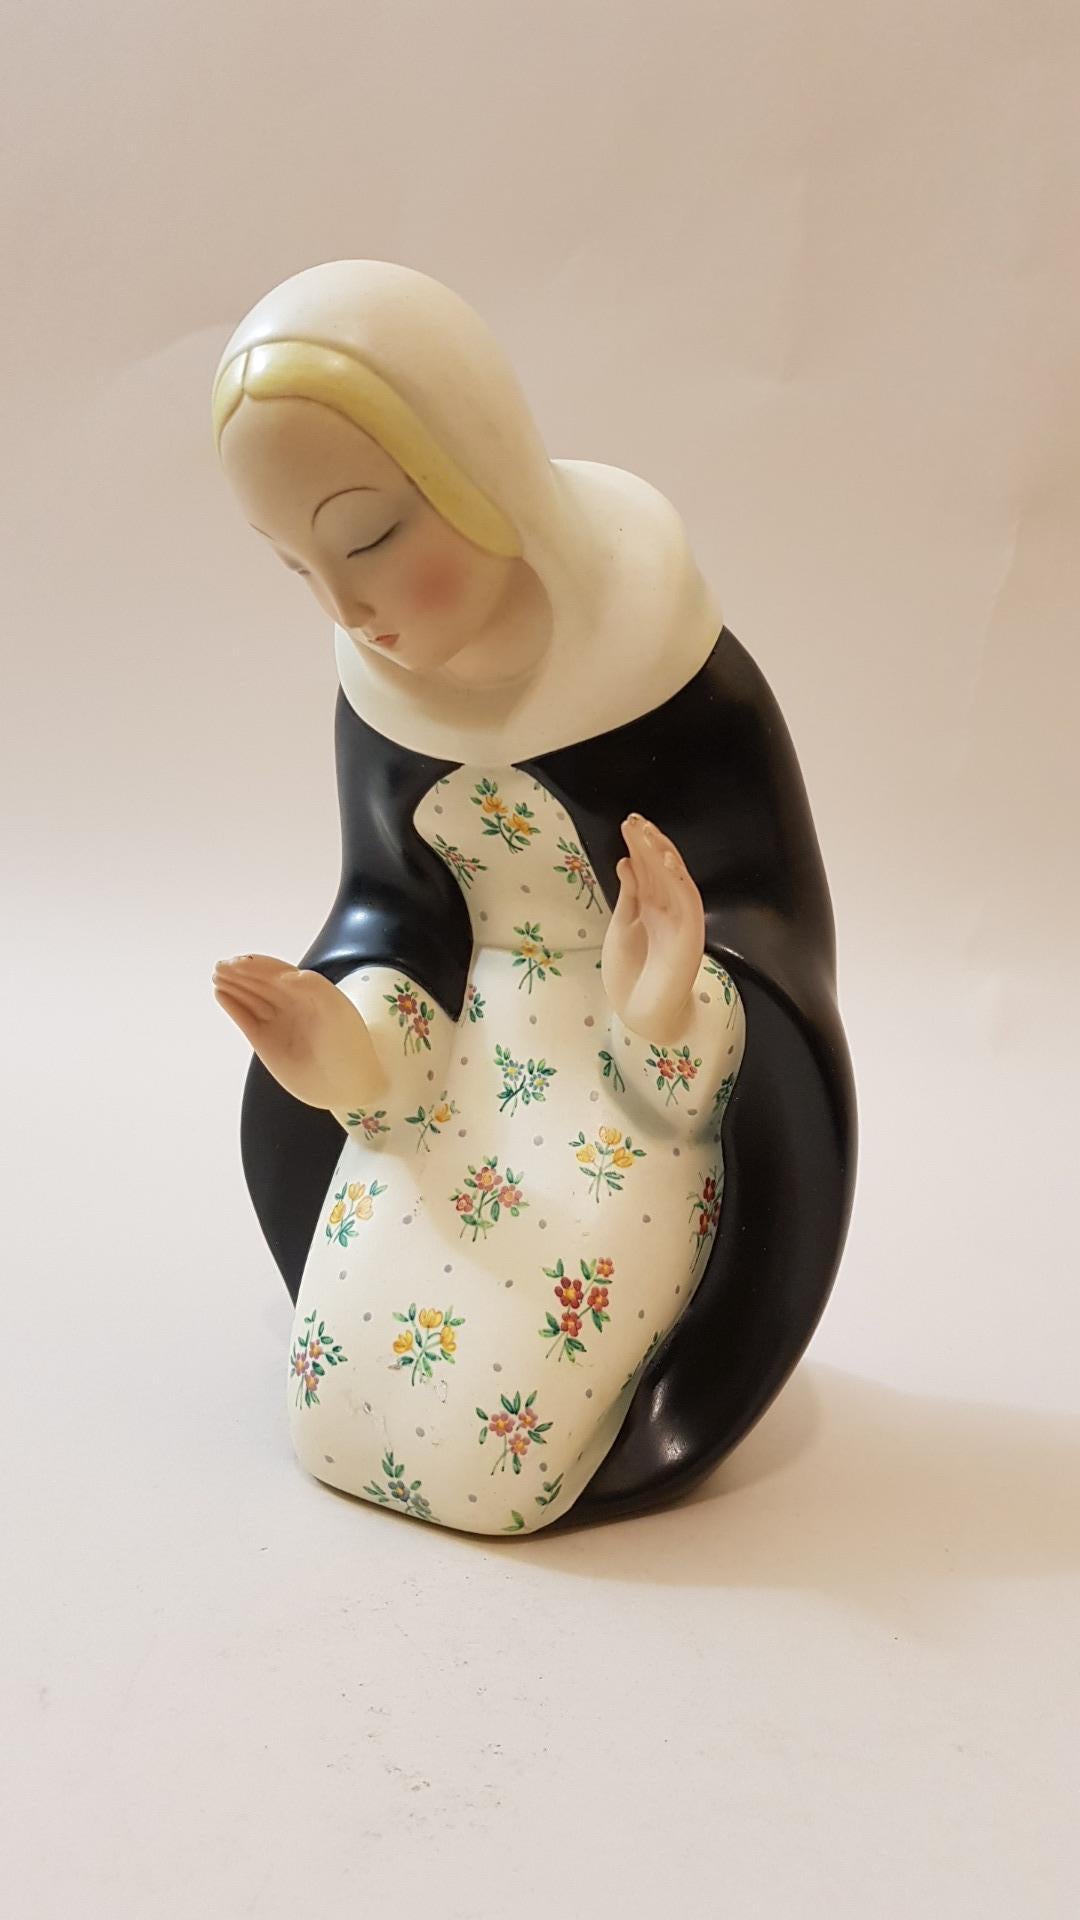 Madonna ceramic with flower decorated dress

Under the signed, dated base and symbol of the decorator.

Published: Alfonso Panzetta 